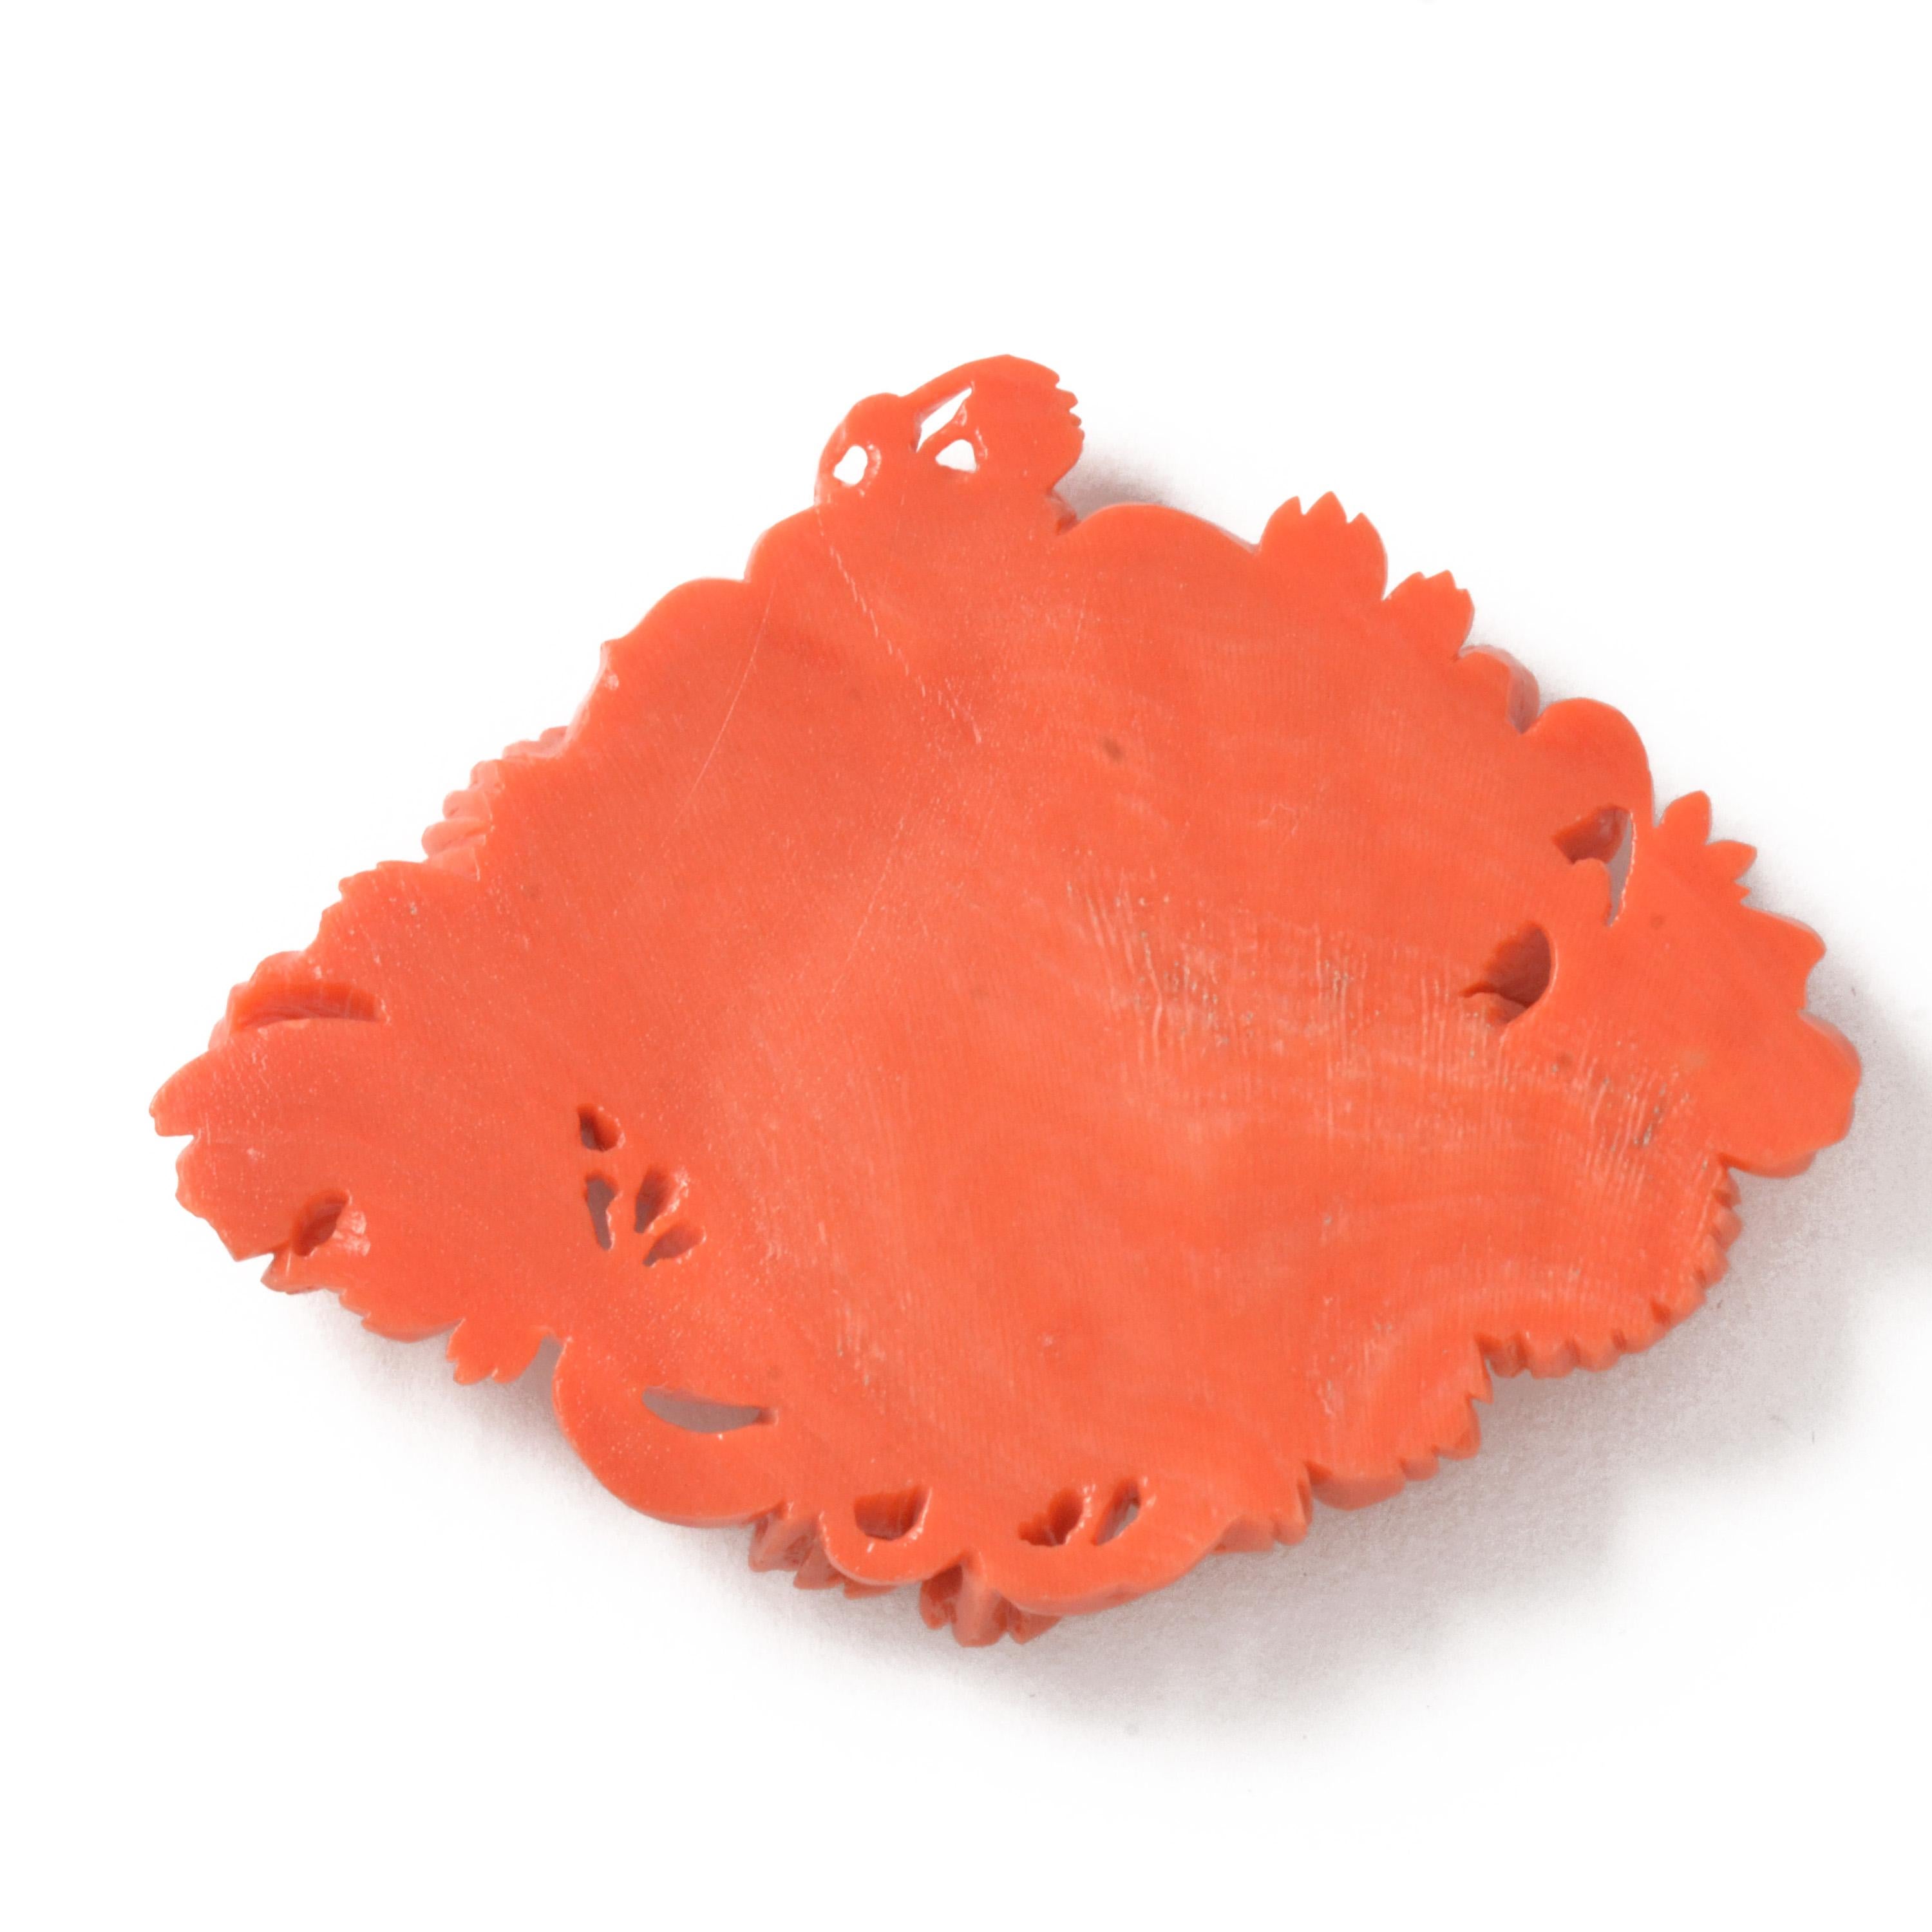 This vintage Japanese Momoiro Sango coral plate is delicately carved from thick coral logs and high-quality material with very little color unevenness. The unique design includes a scene of butterflies and pompon chrysanthemums. There is also